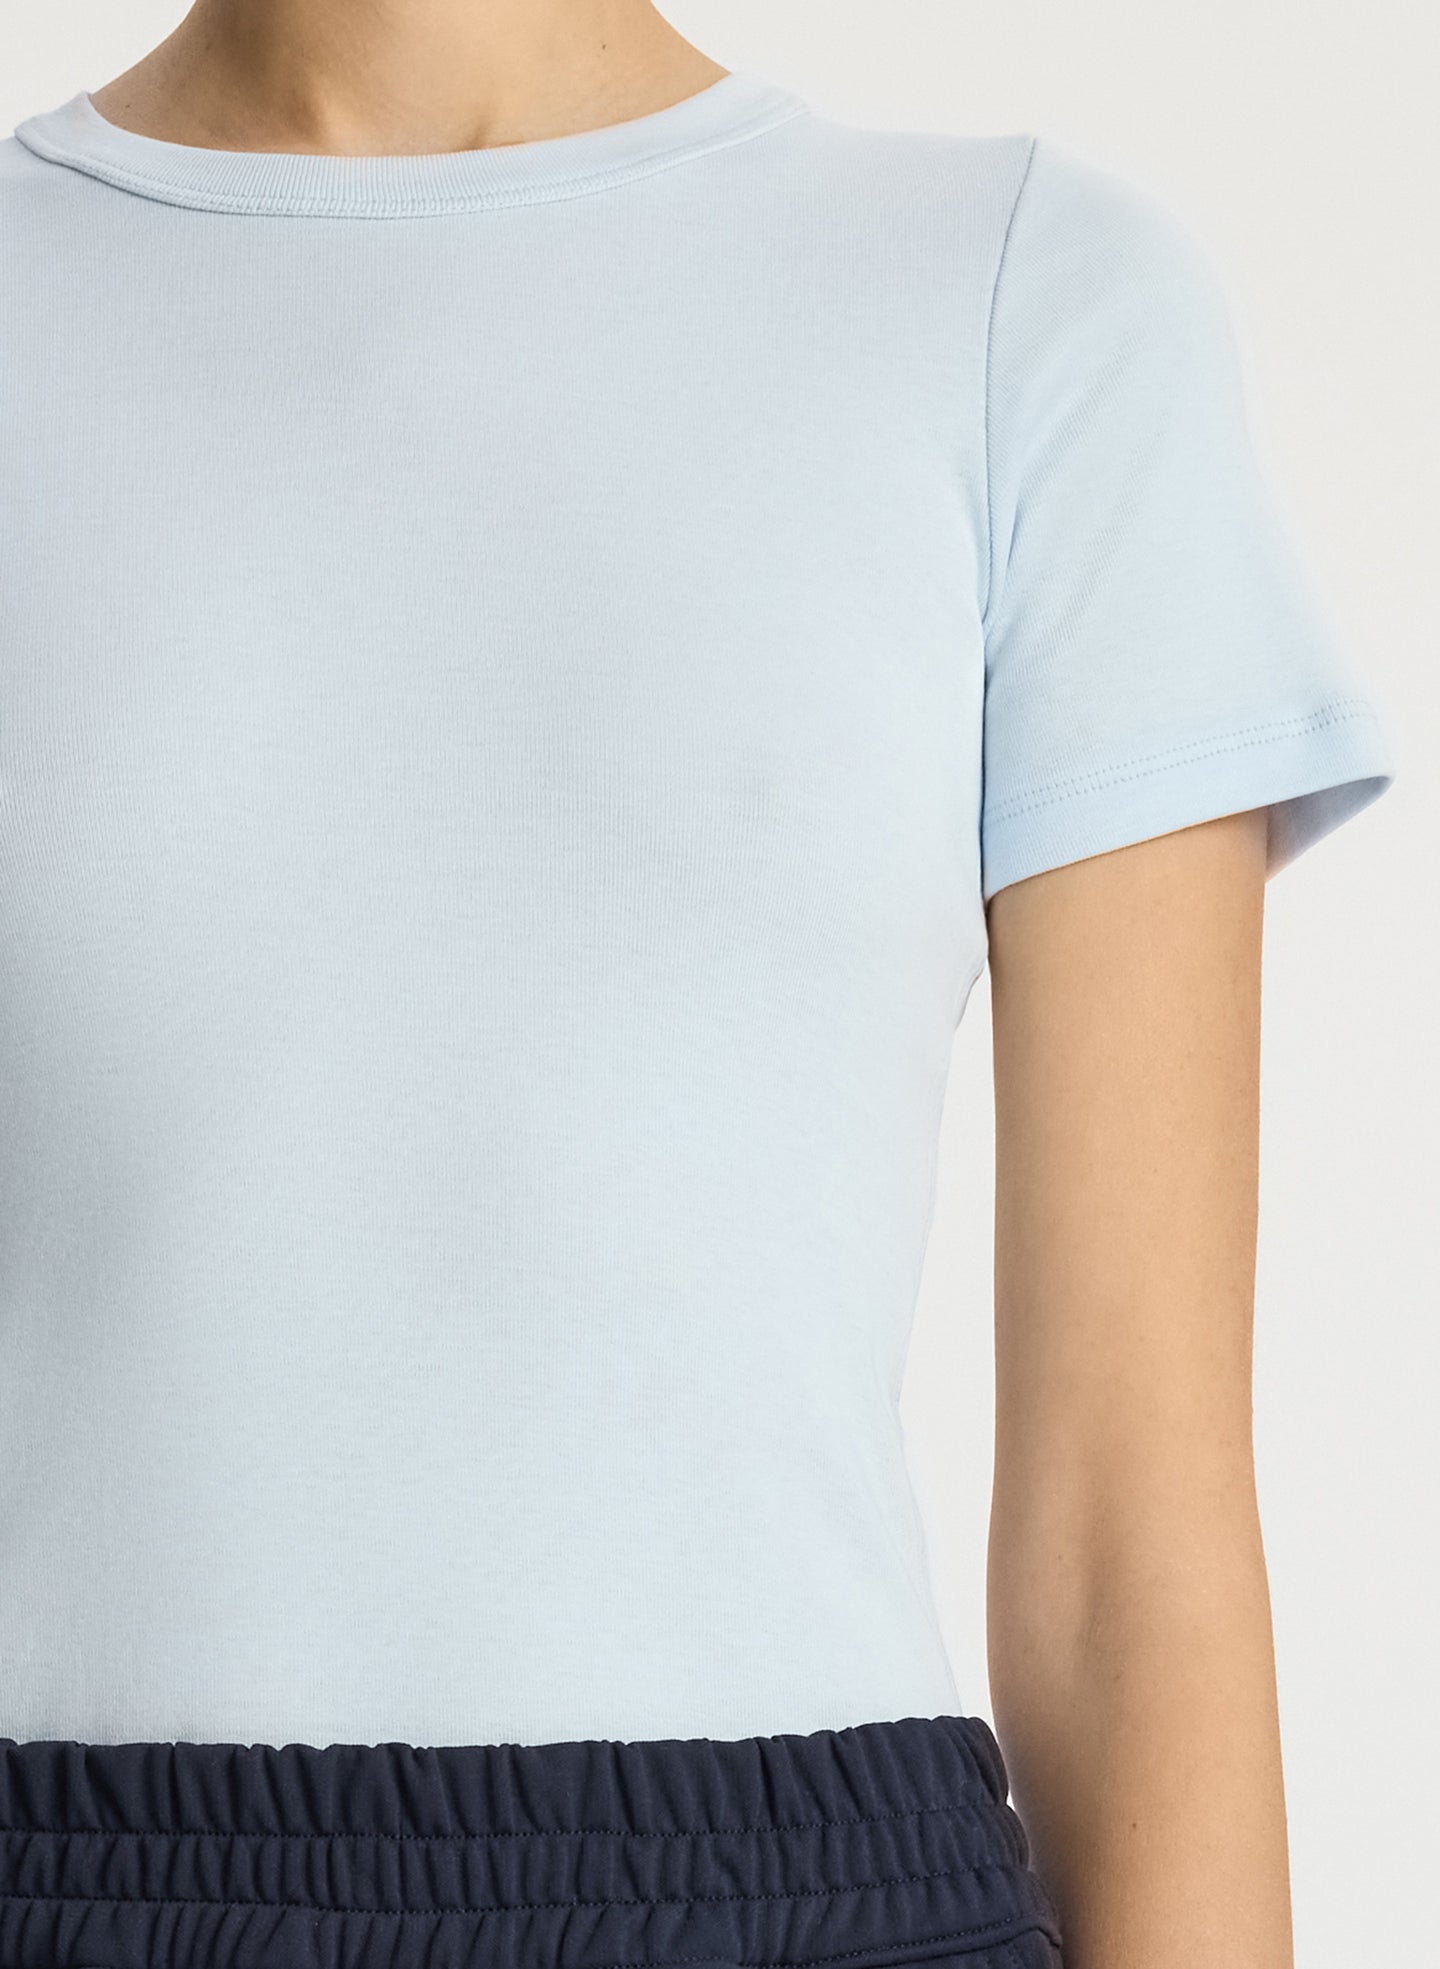 detail view of woman wearing light blue tshirt and navy blue pants